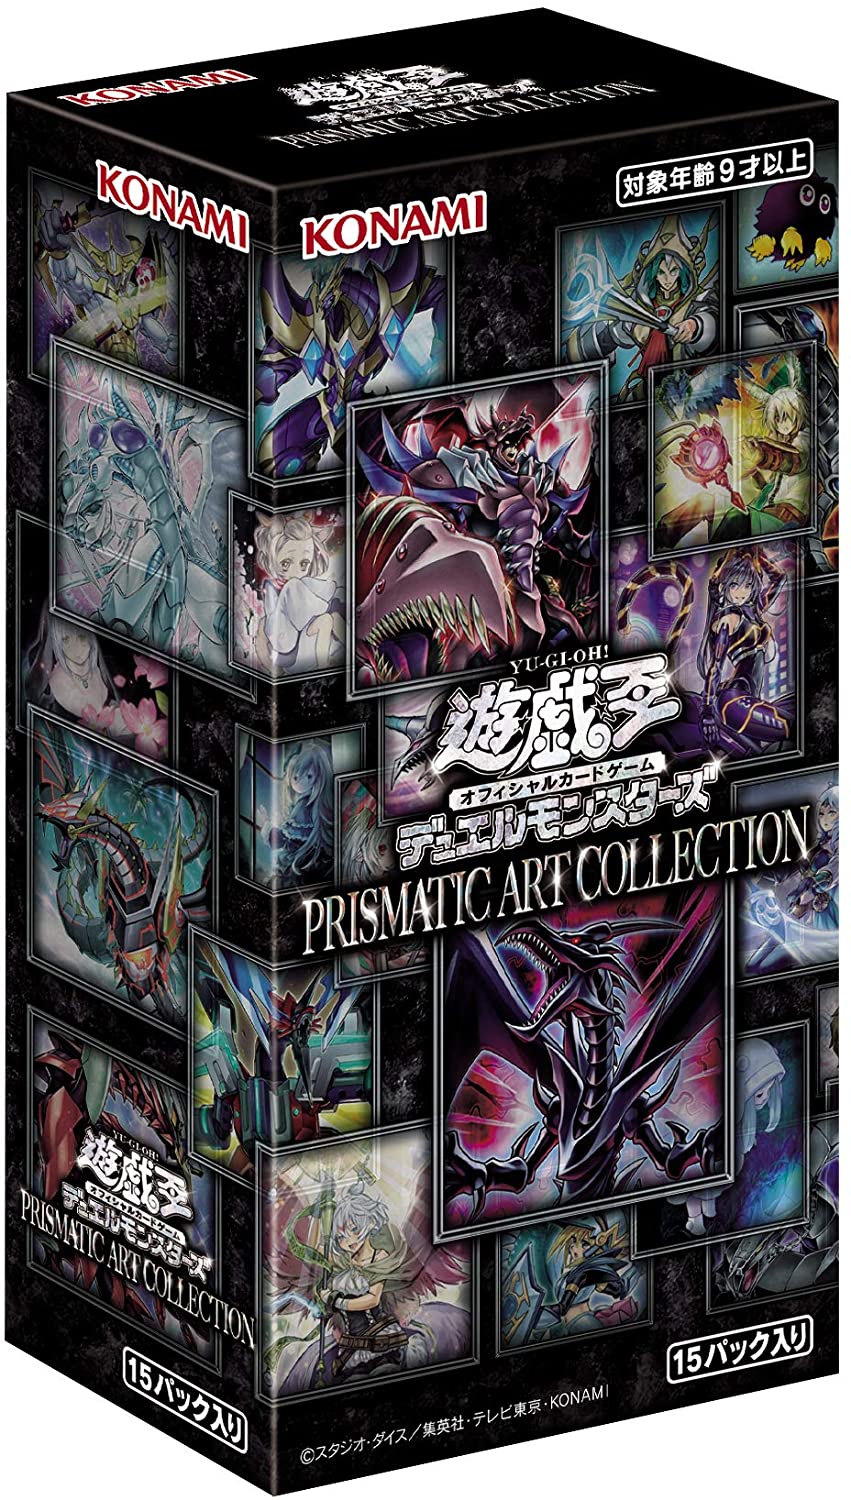 Yu-Gi-Oh! OCG Duel Monsters PRISMATIC ART COLLECTION Box